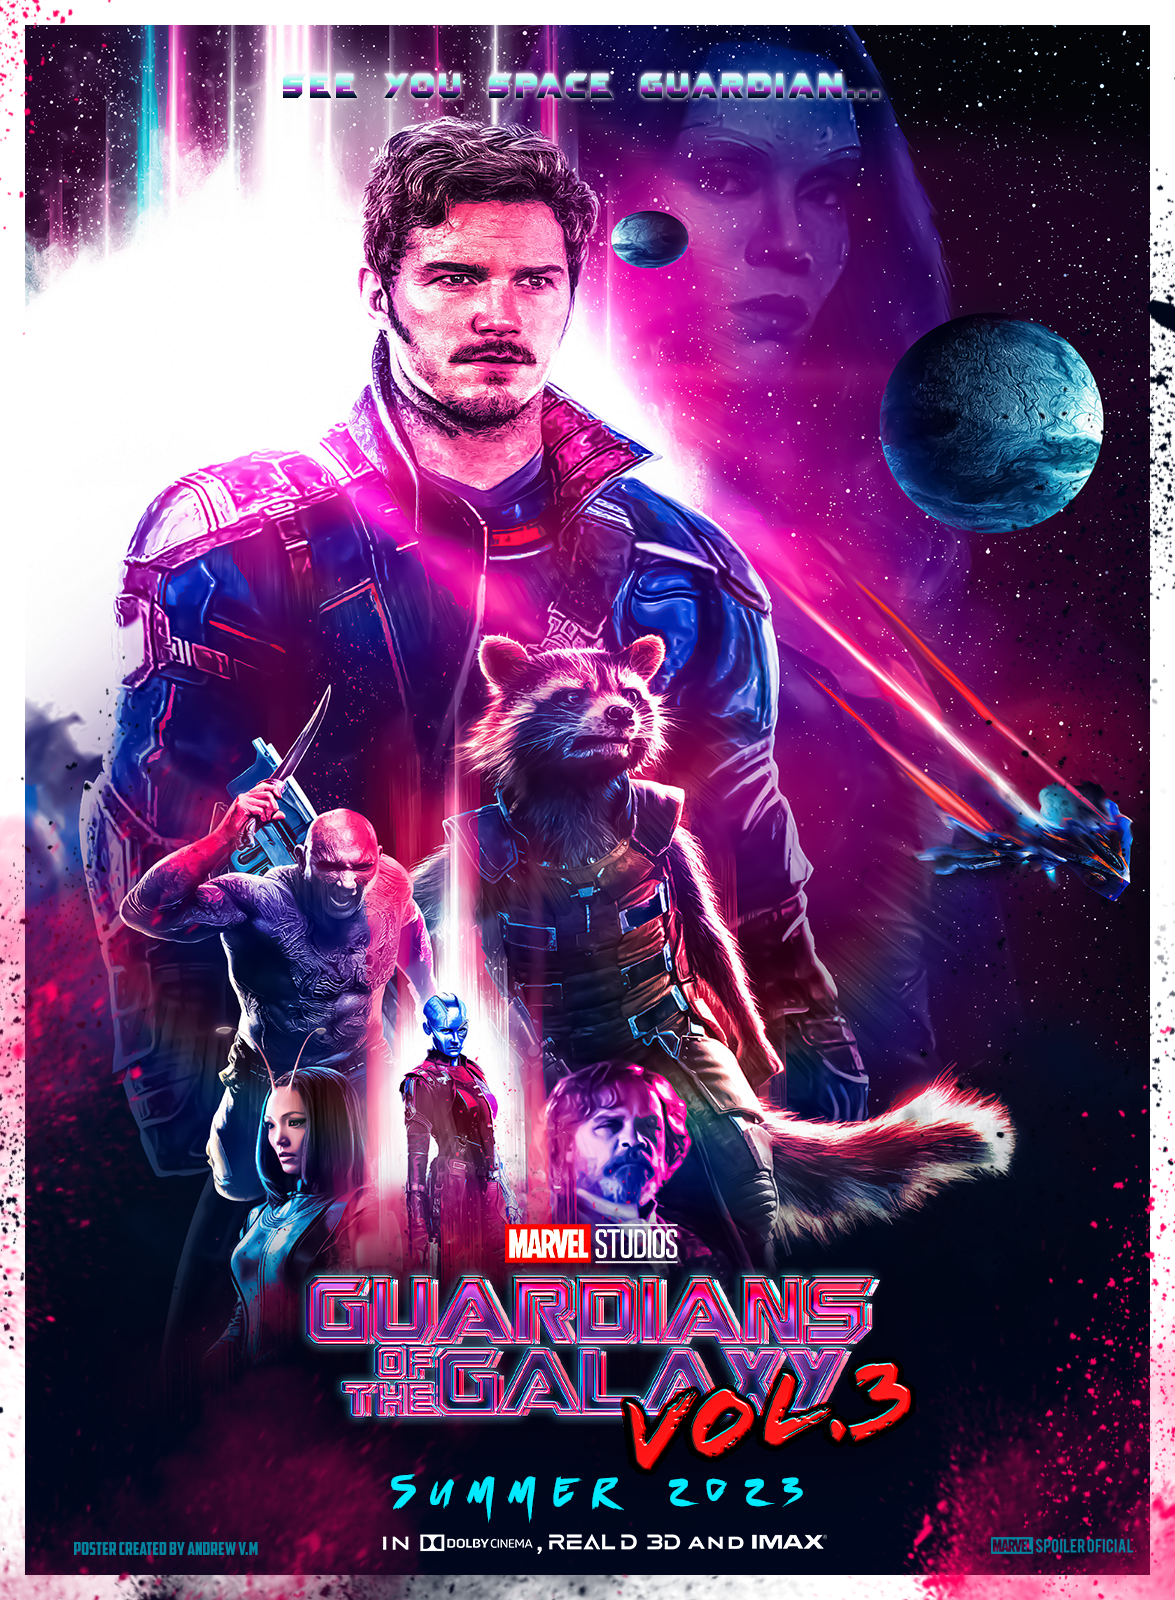 Guardians Of The Galaxy Vol Ufabet